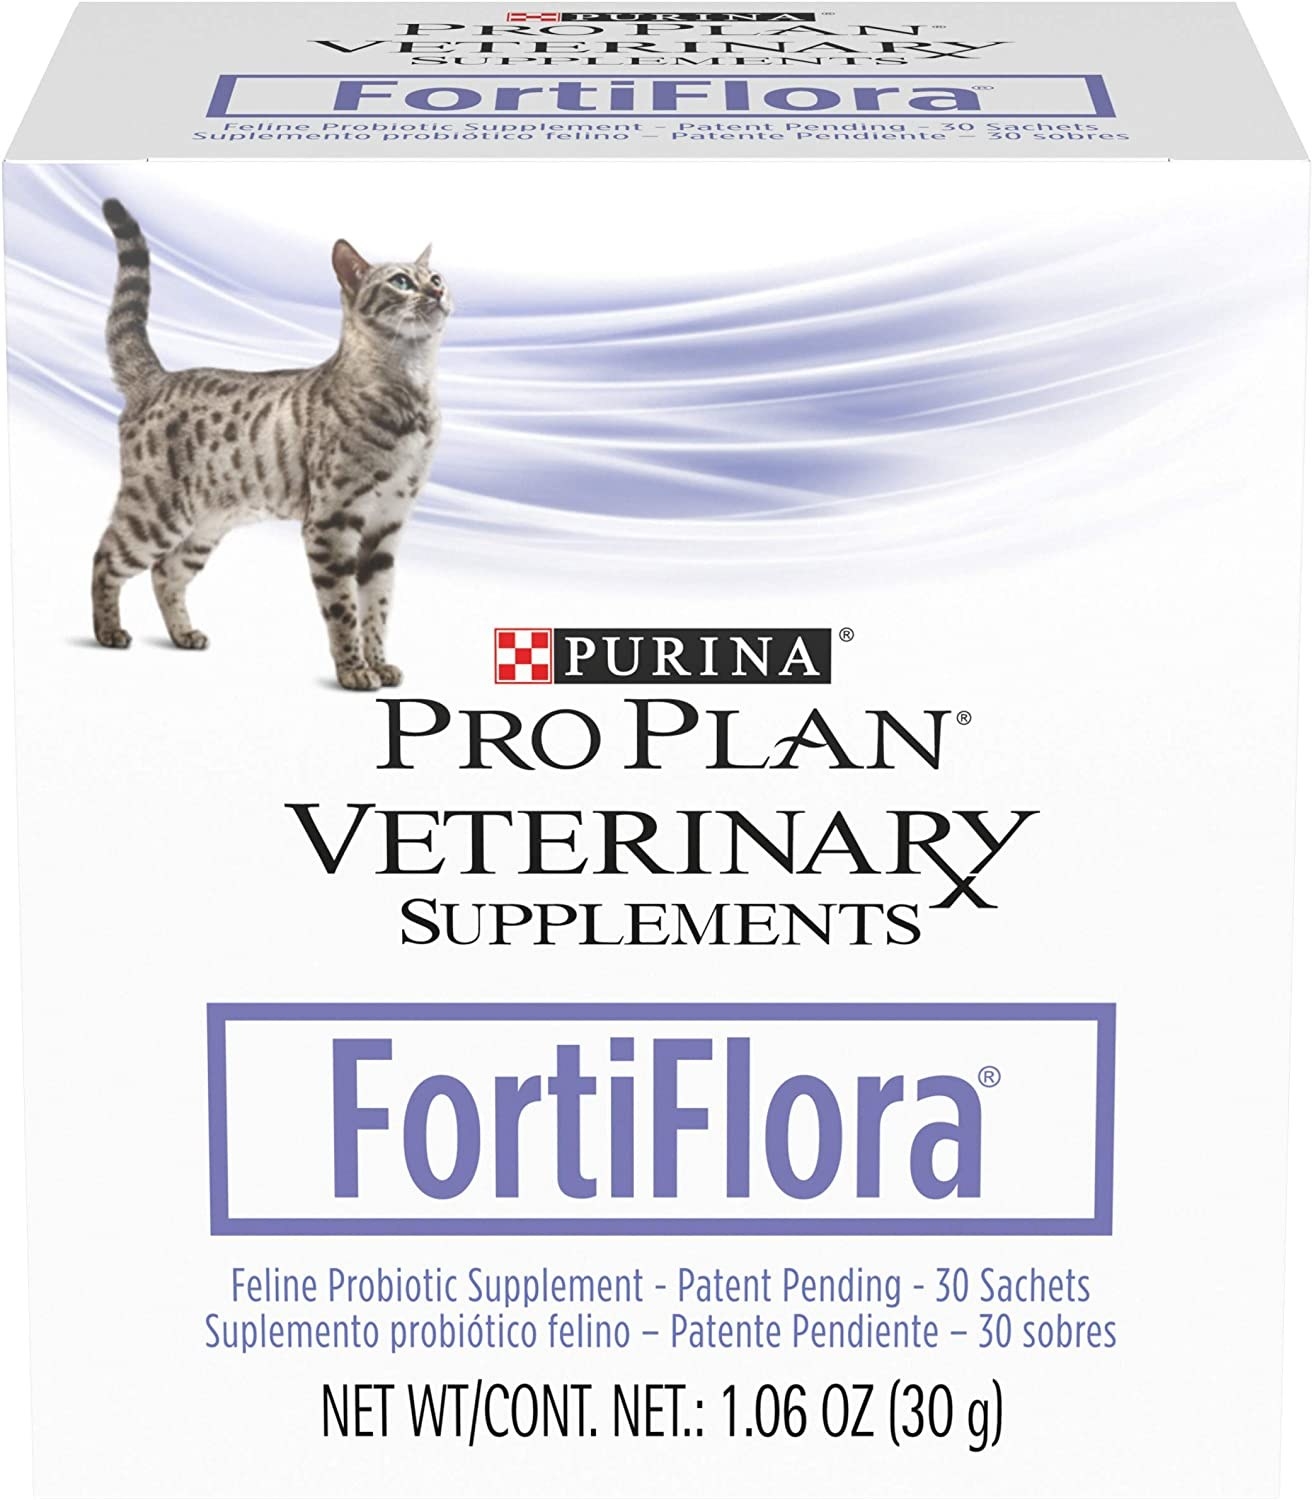 White packaging of cat probiotic supplements